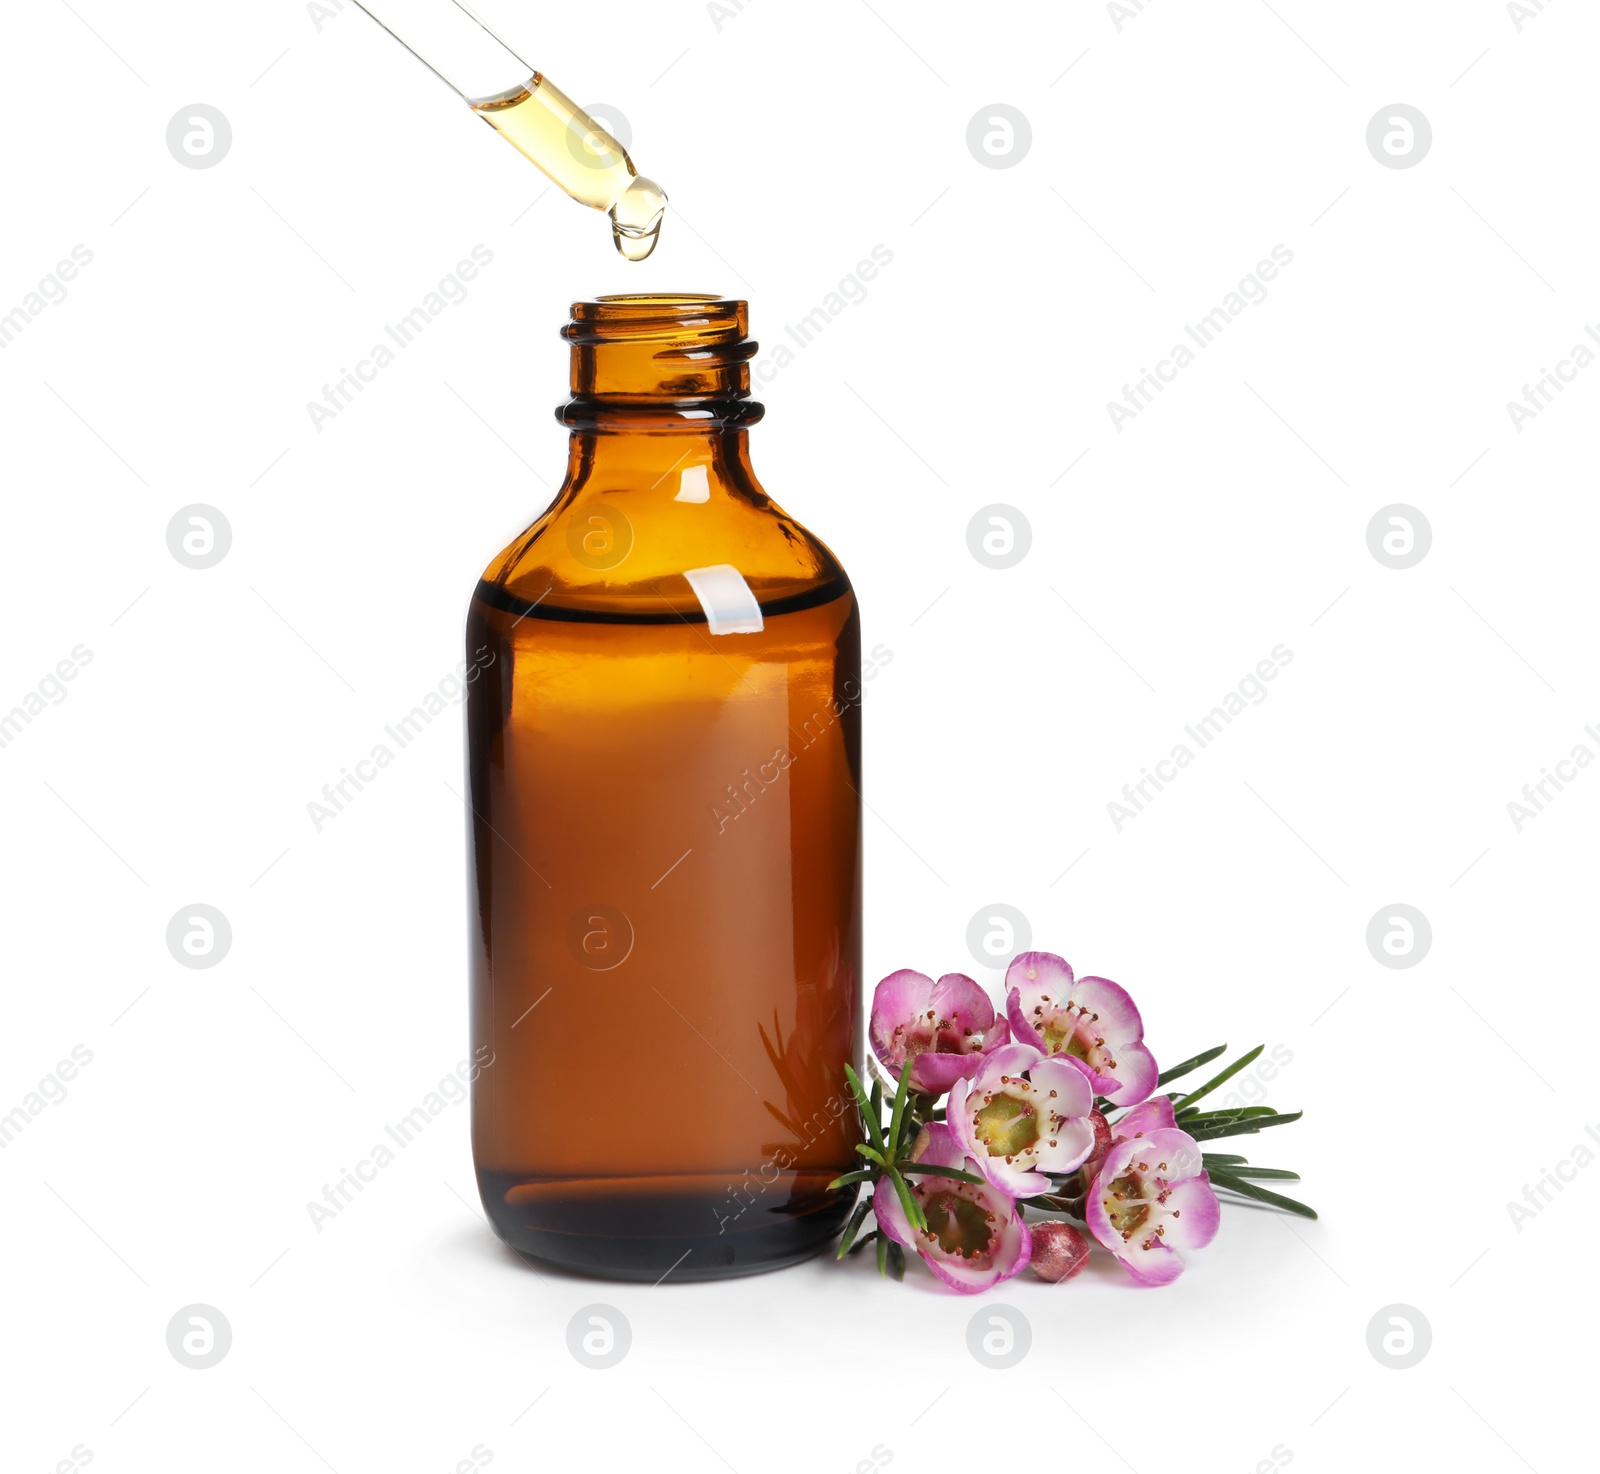 Photo of Dripping natural essential oil into bottle near tea tree branch on white background